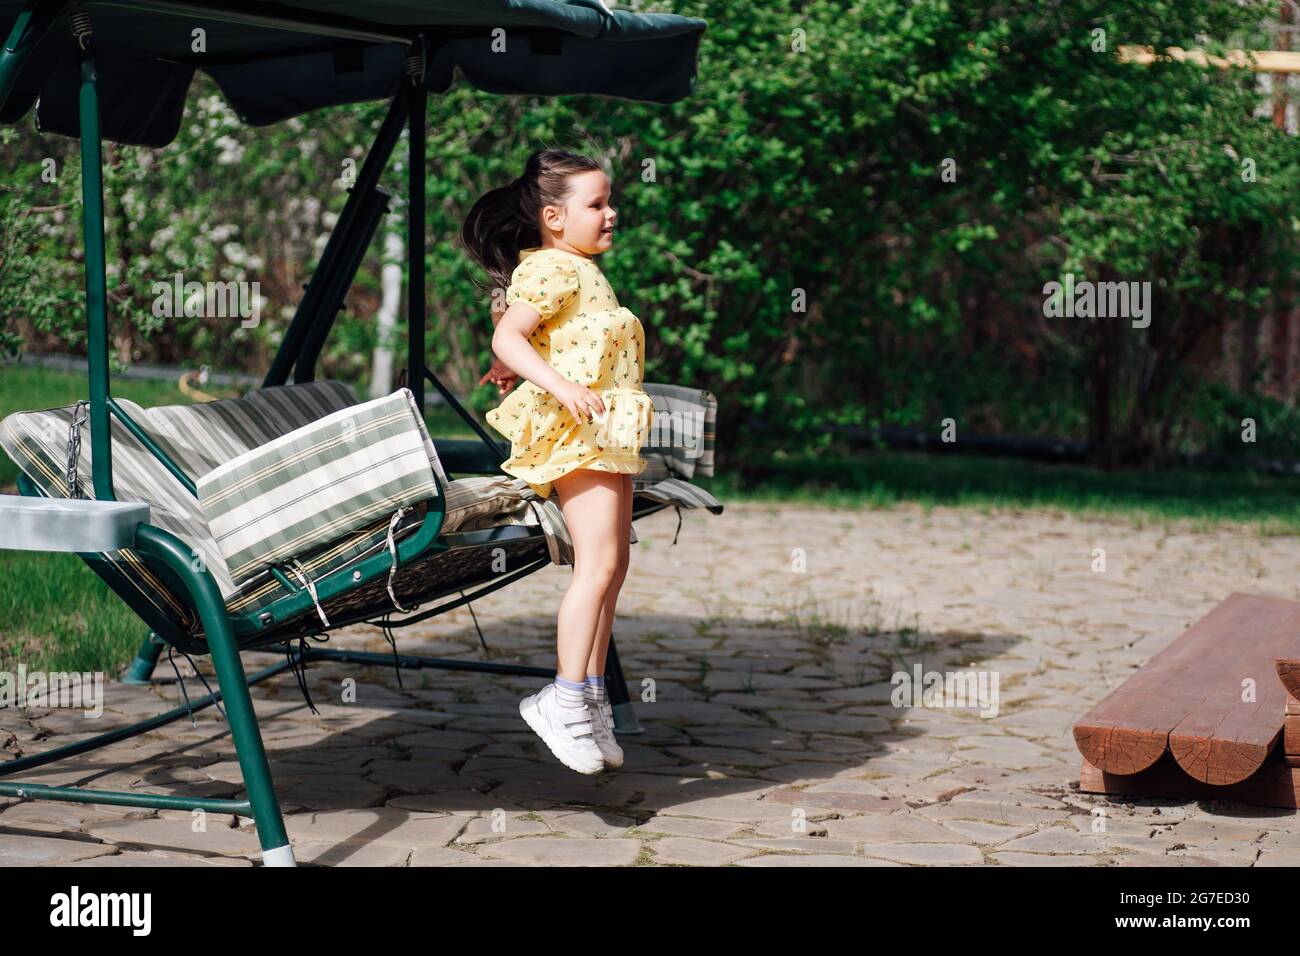 a girl jumps from a garden swing in a summer garden in the backyard, the moment of movement and flight in the air Stock Photo